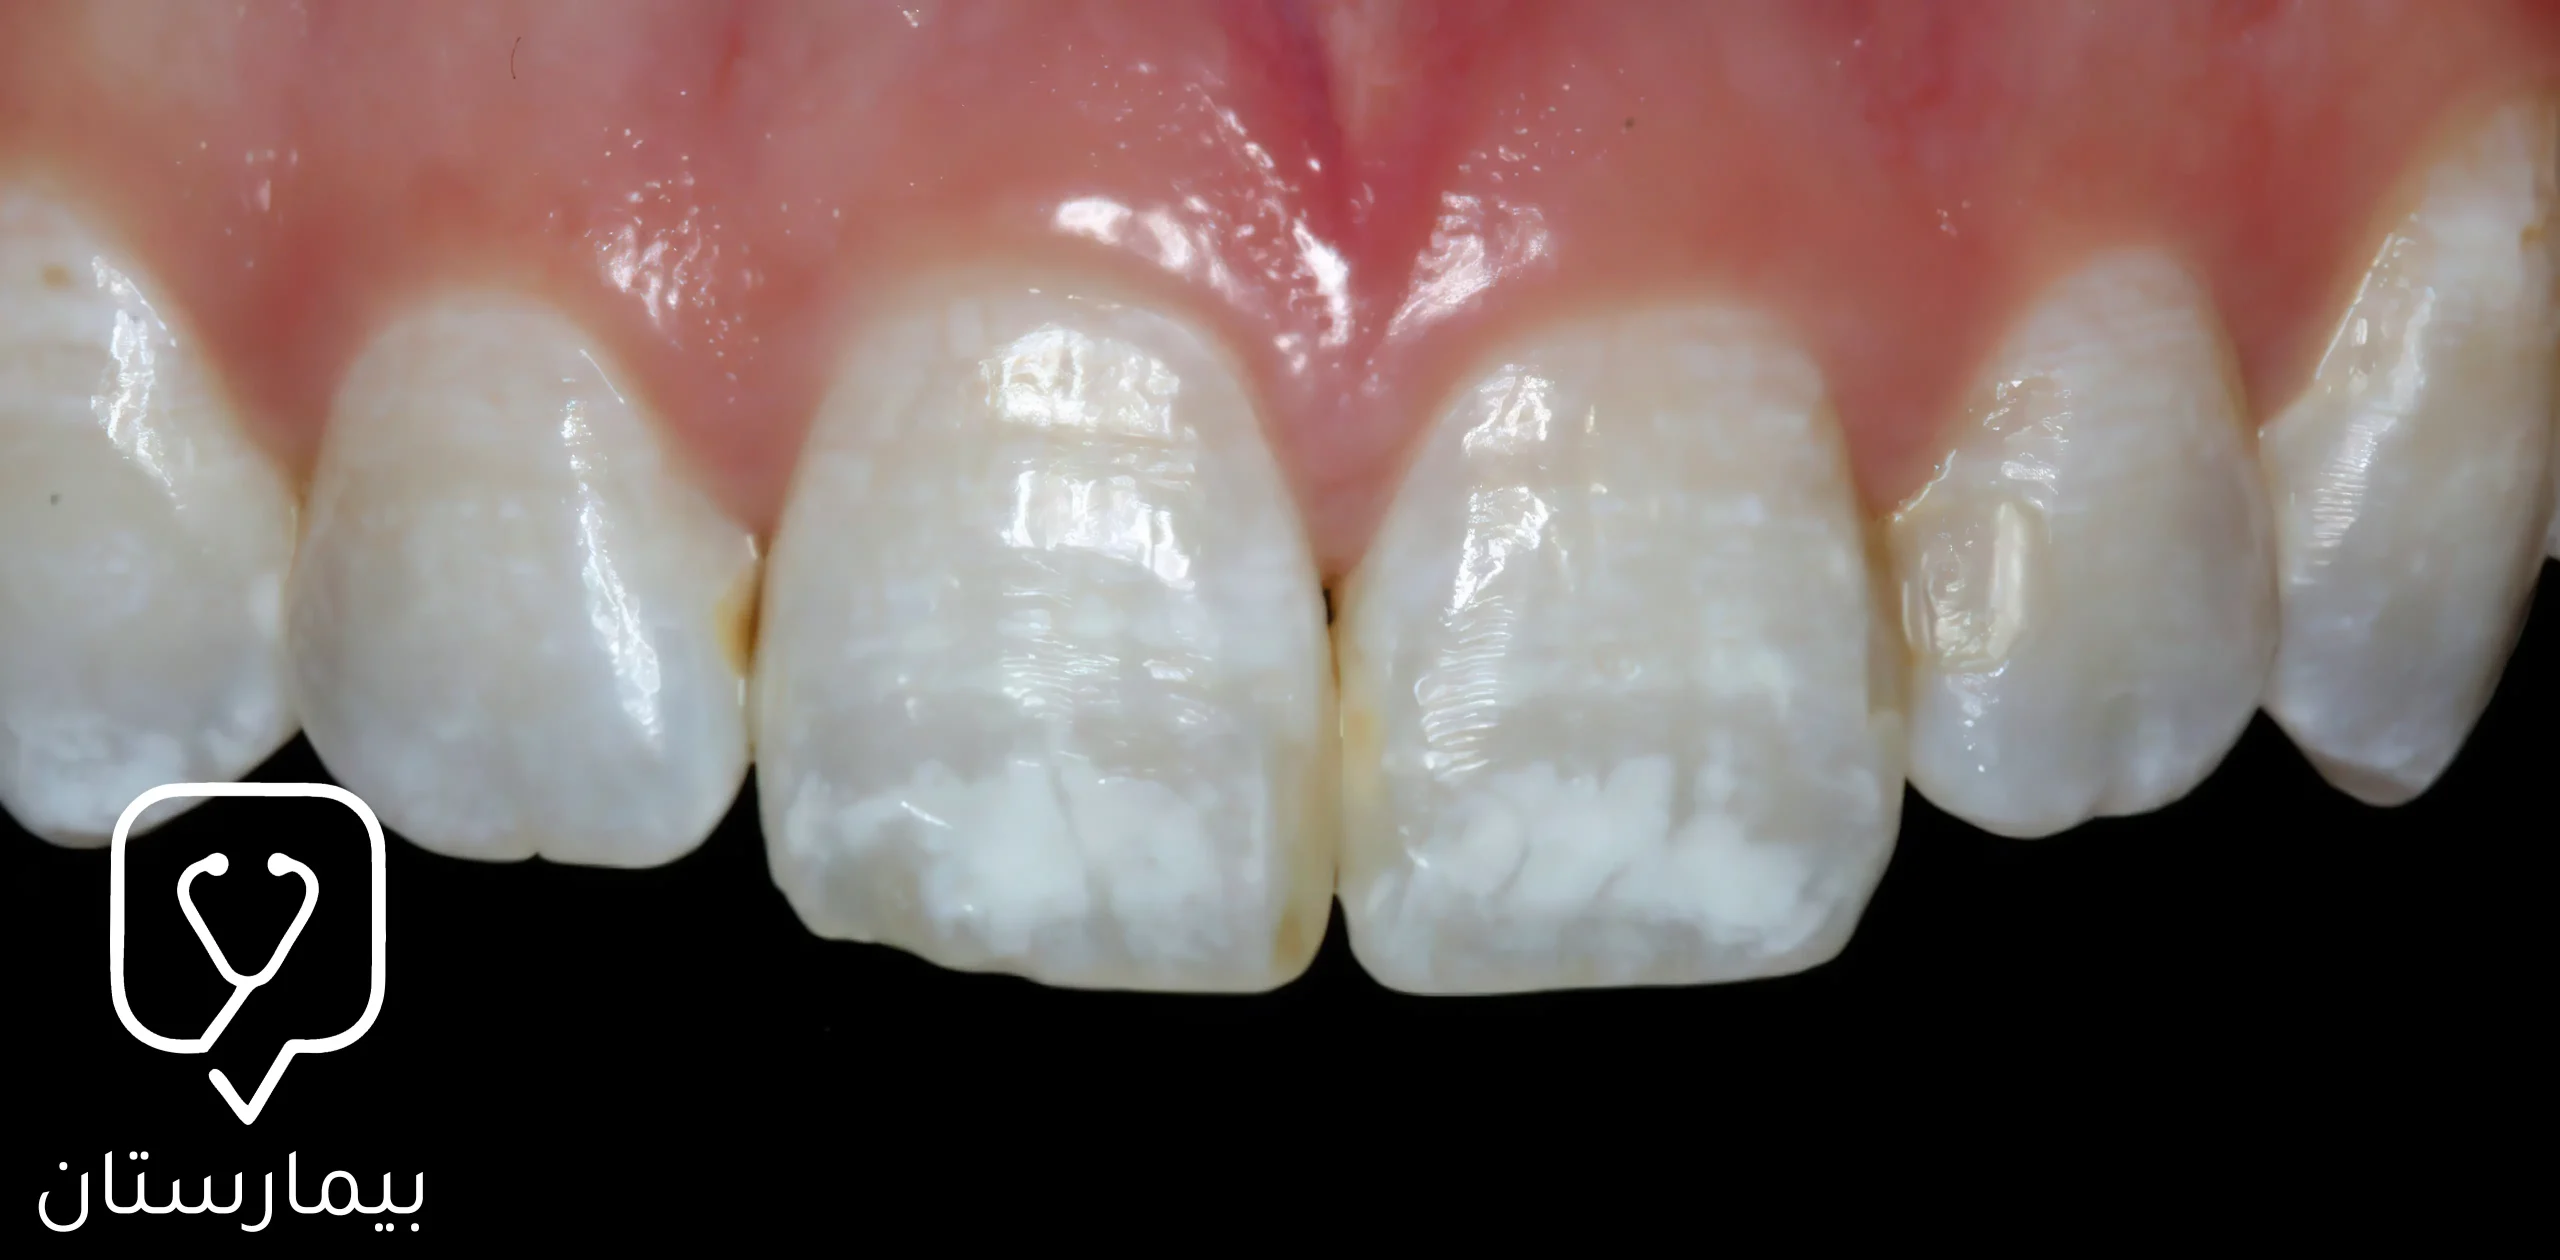 Excessive intake of fluoride and its incorrect use may cause white pigmentation called dental fluorosis